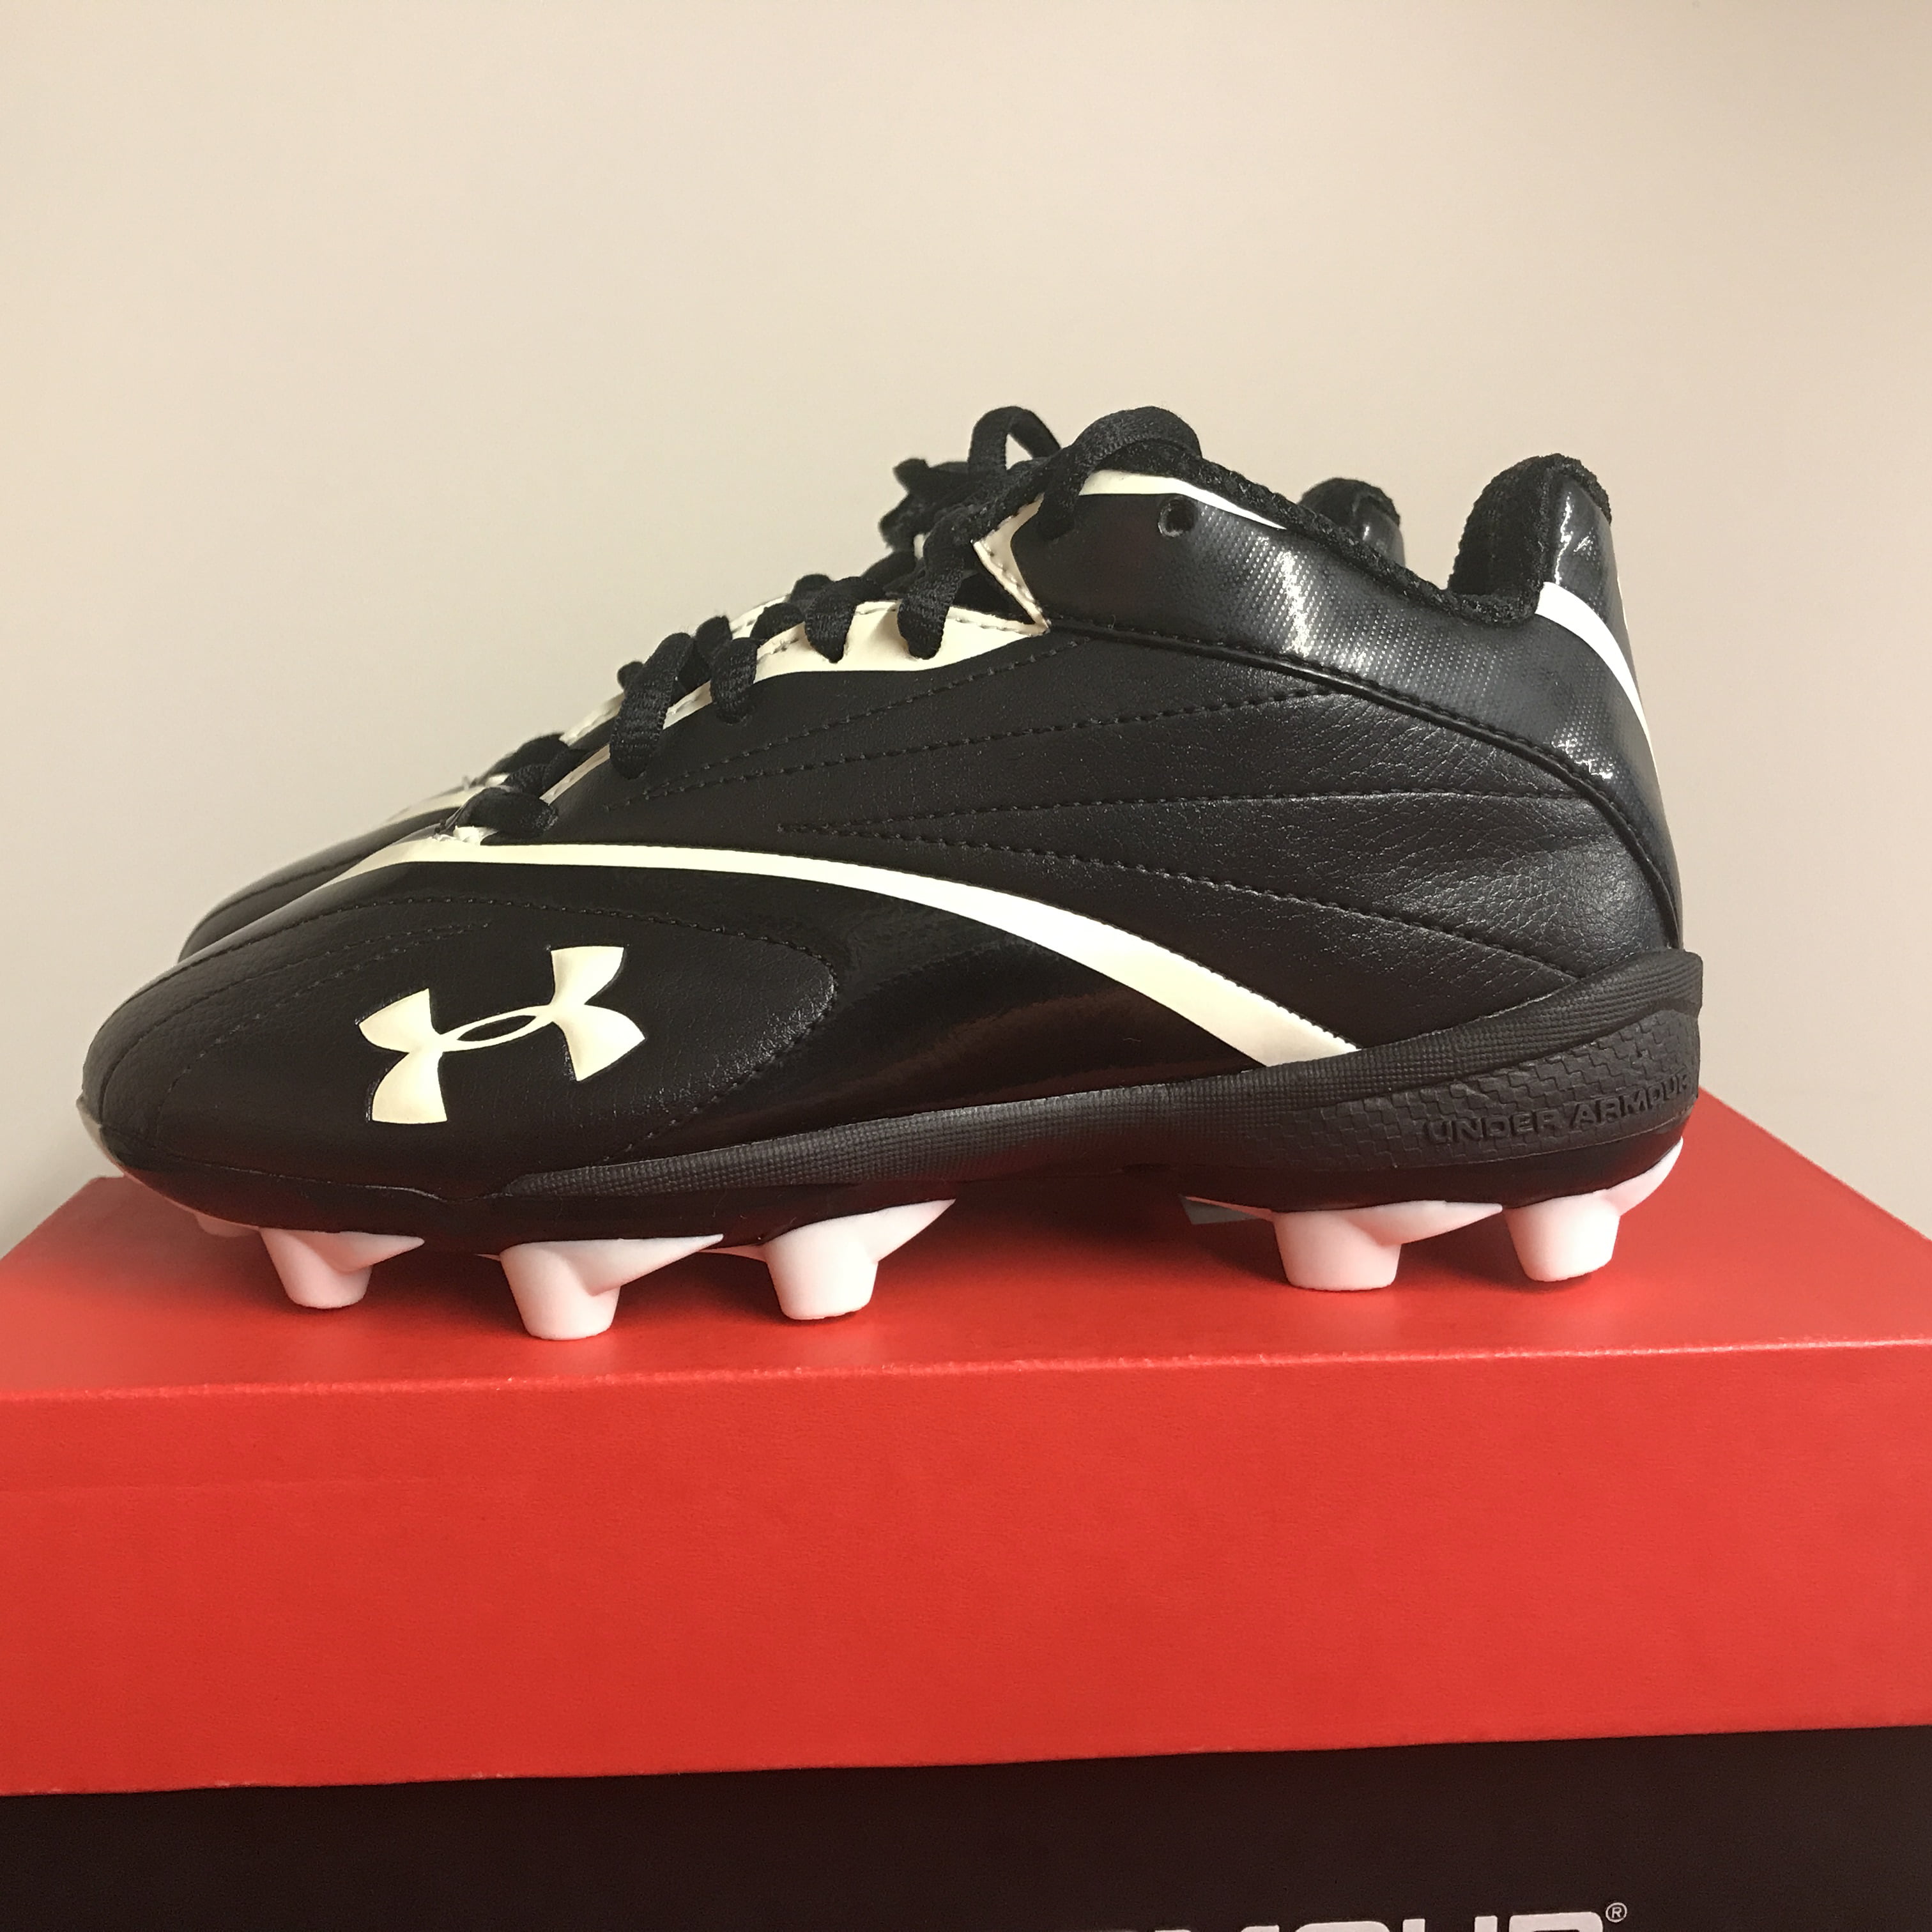 the flash football cleats